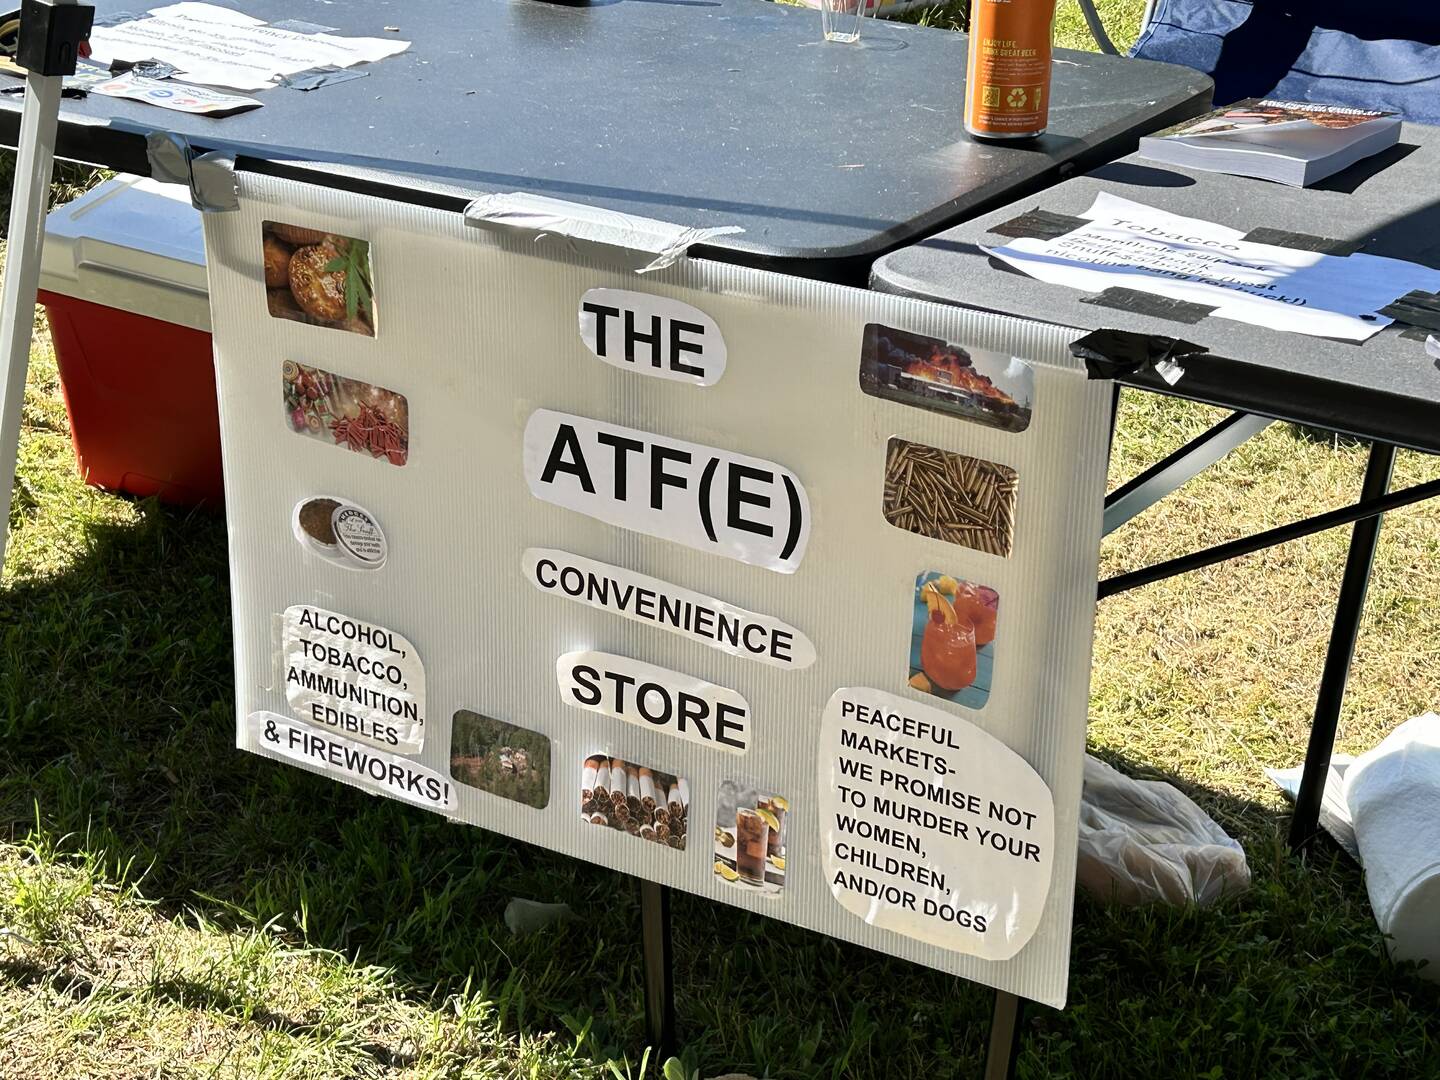 A sign for a convenience store at Porcfest (Photo by author)